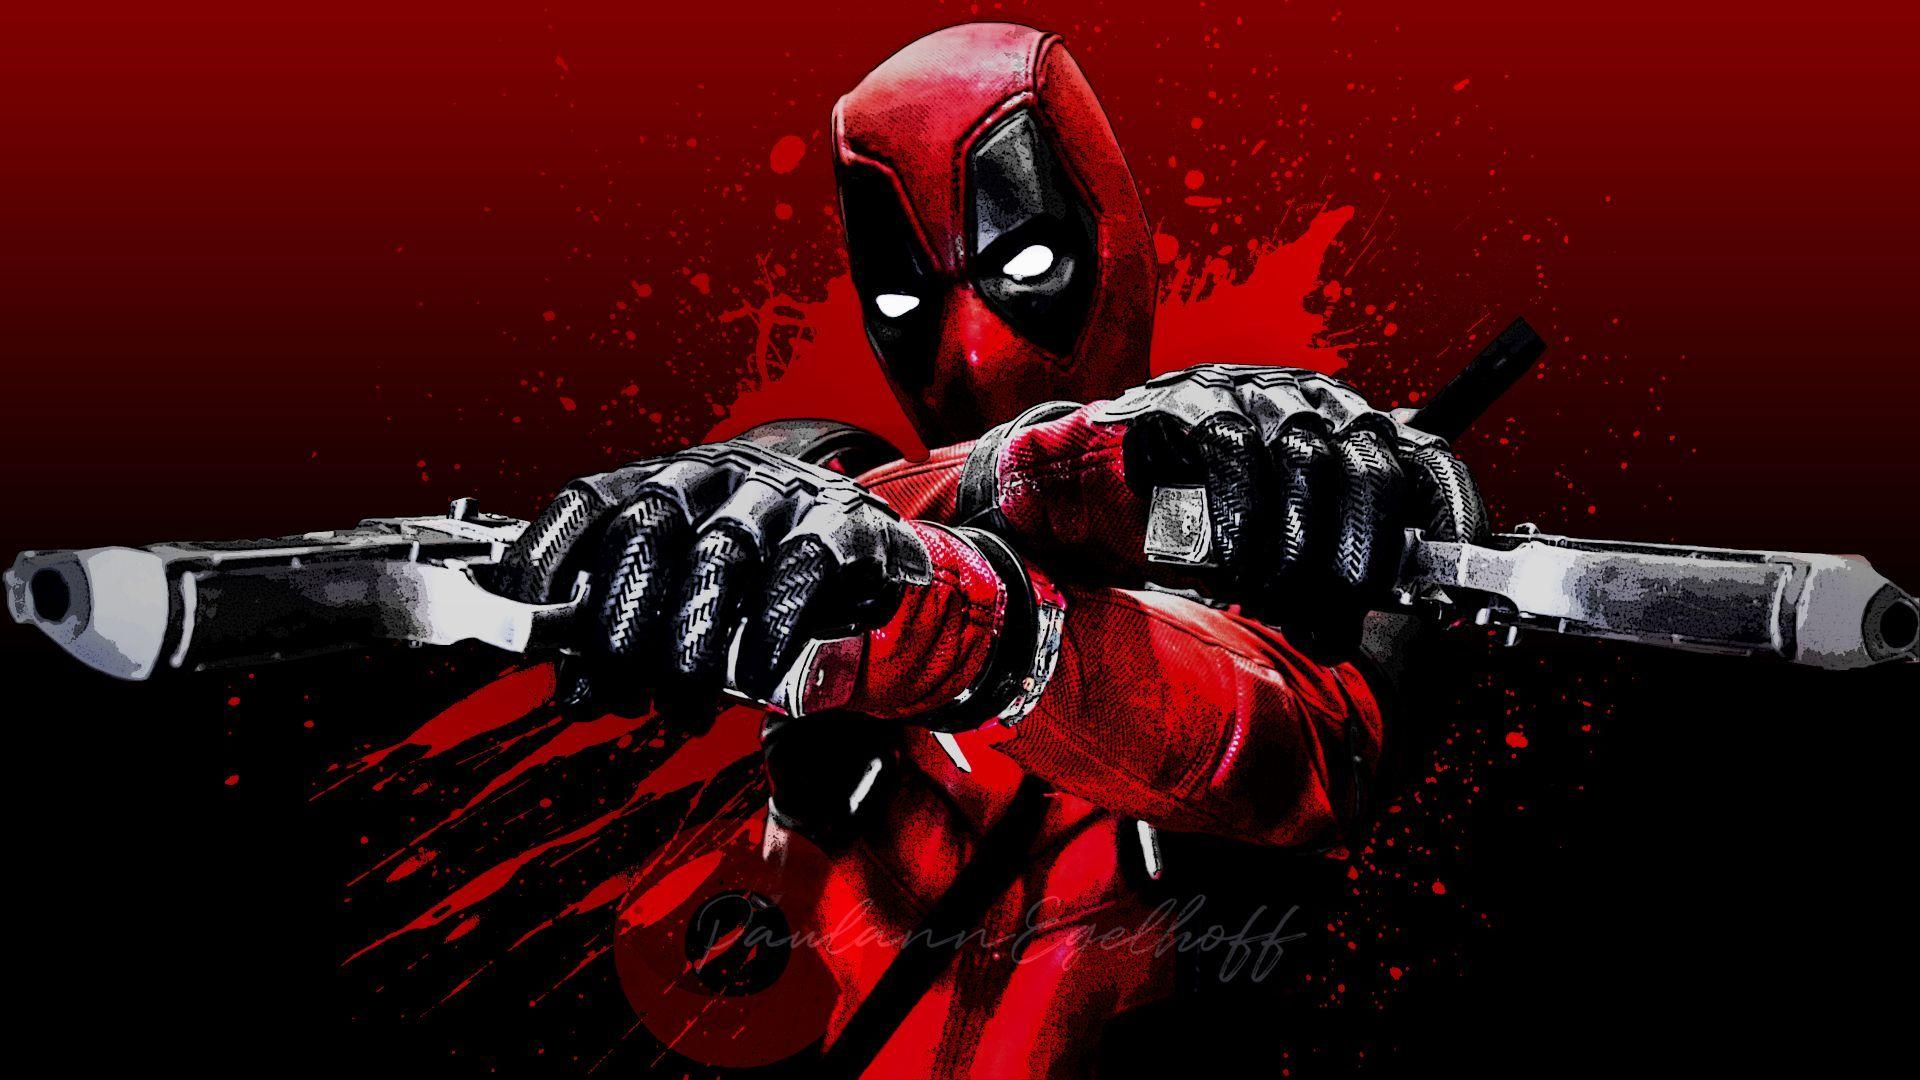 Download wallpapers of Deadpool, Merc with a Mouth, Marvel Comics